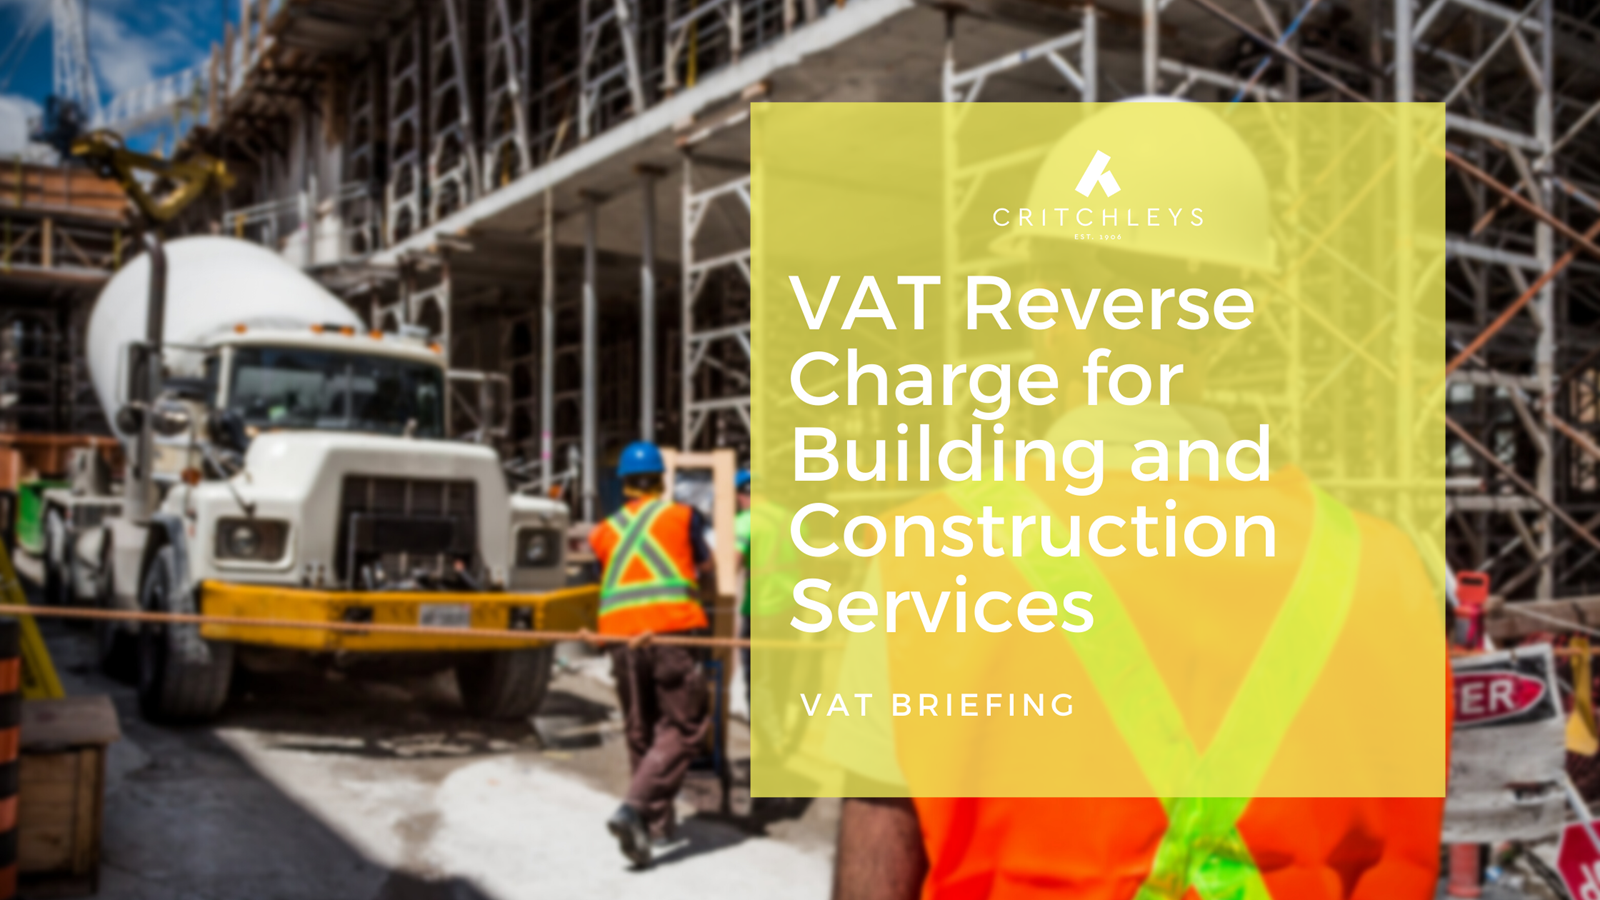 VAT Reverse Charge for Building and Construction Services